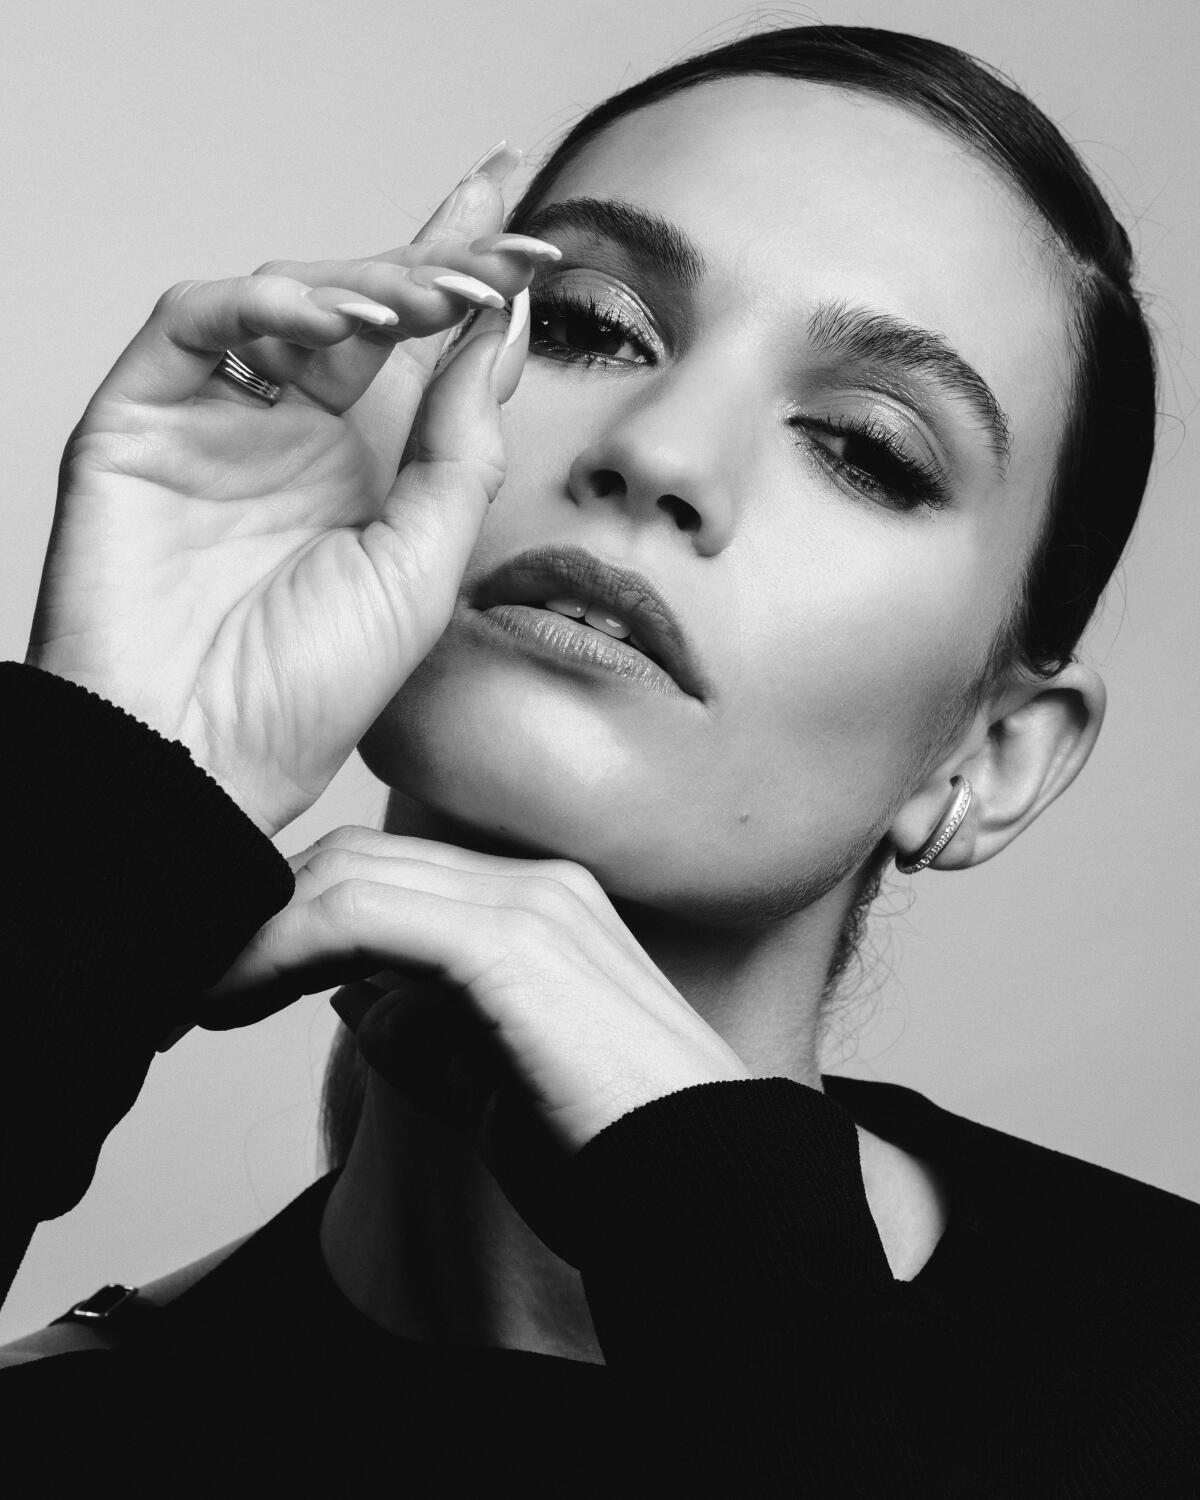 Lily James poses for a tight portrait with her hands near her face.